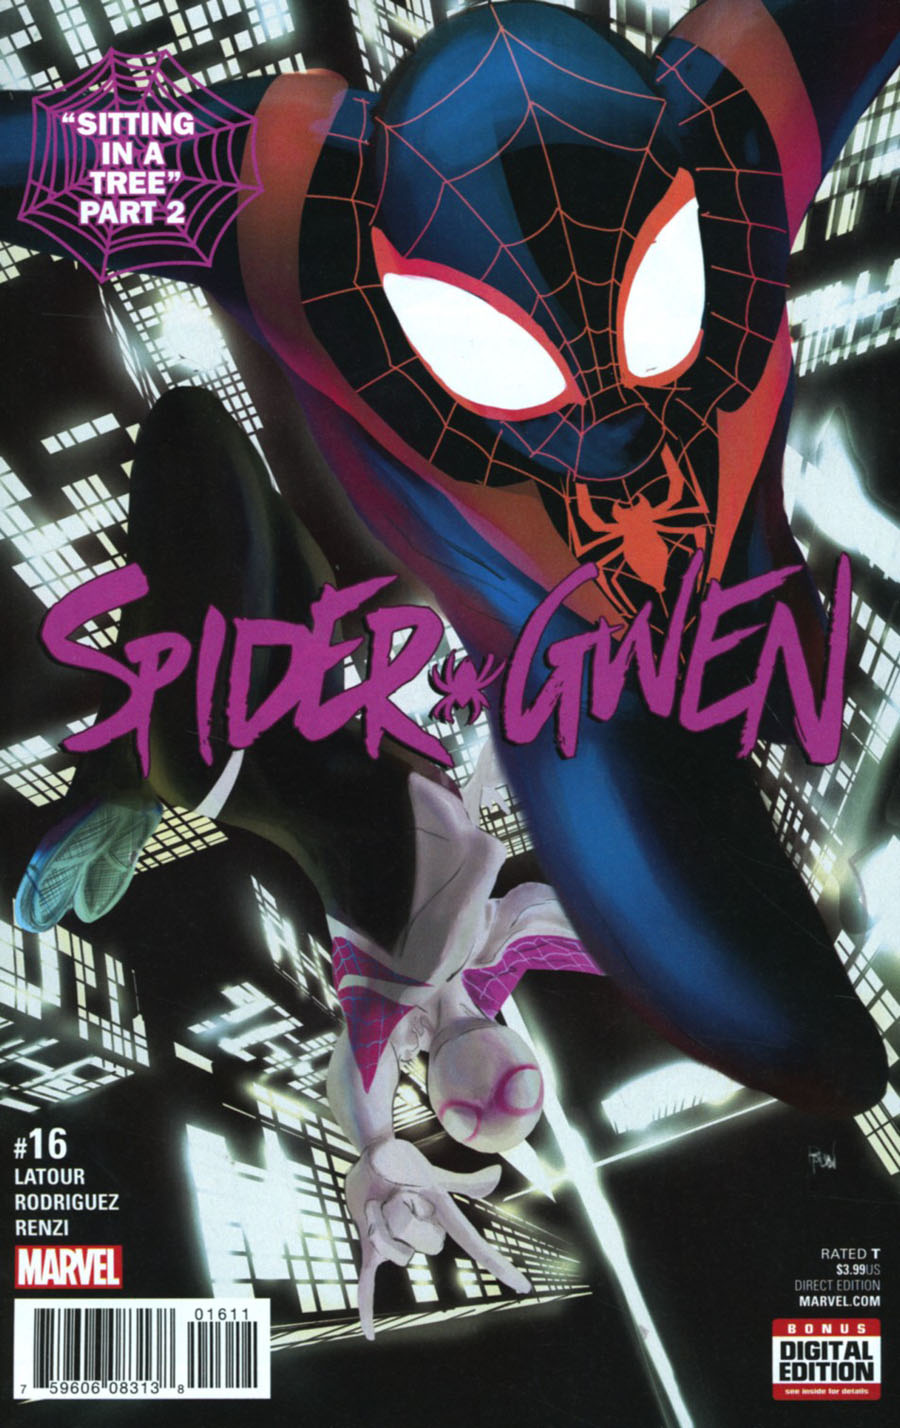 Spider-Gwen Vol 2 #16 Cover A Regular Robbi Rodriguez Cover (Sitting In A Tree Part 2)